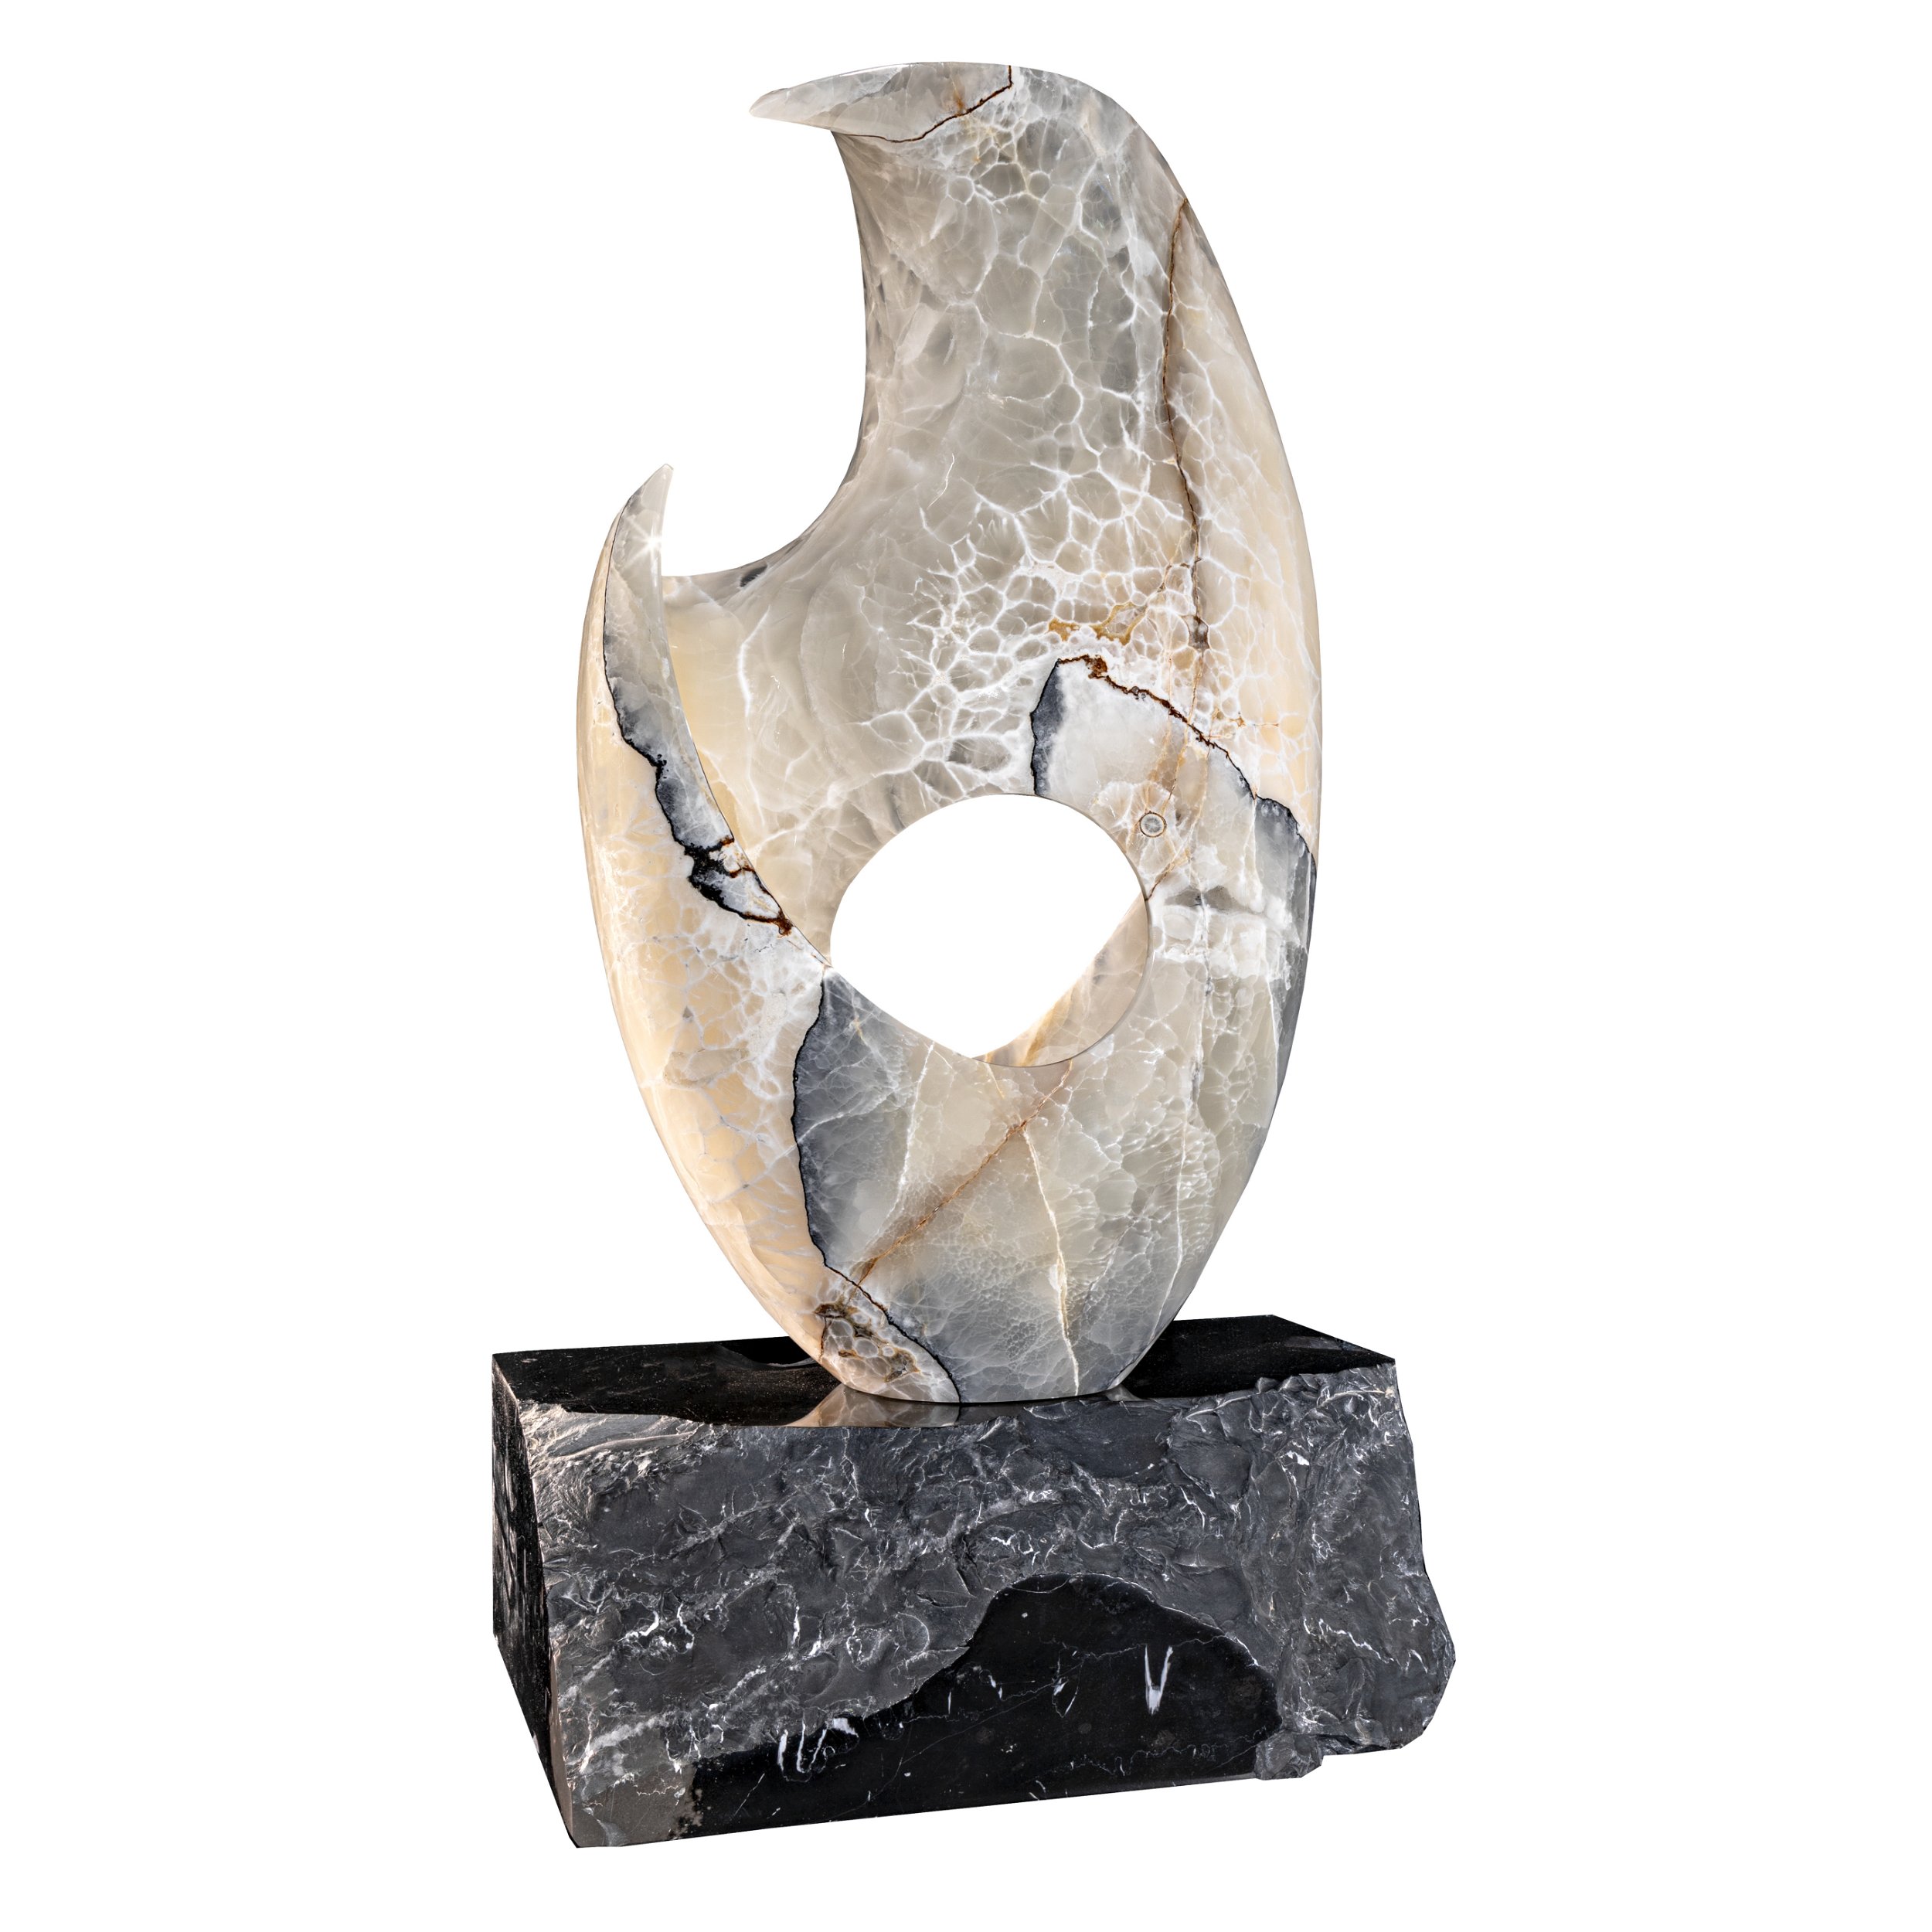 Pearlescent Onyx Sculpture - Hole in Centered Wave with Black Marble Base